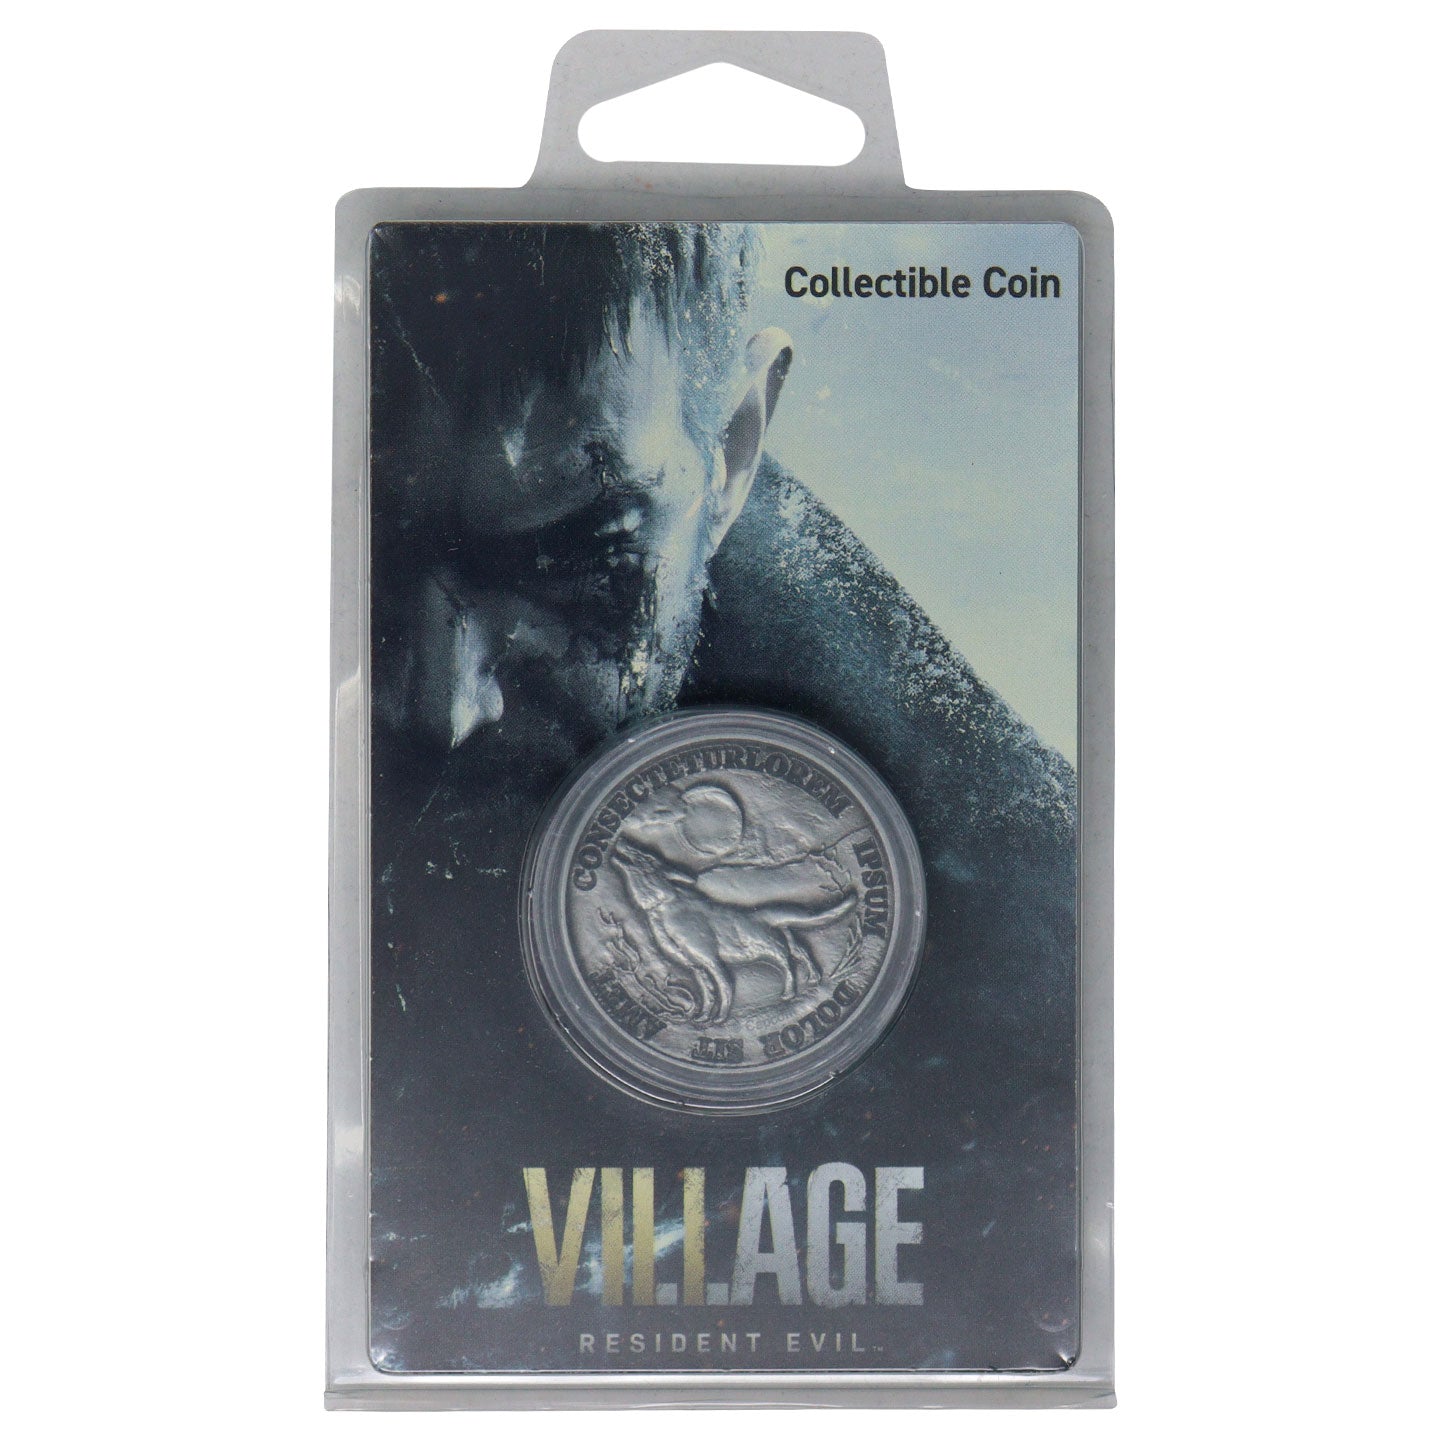 Resident Evil Village Limited Edition Currency Replica Collectible Coin